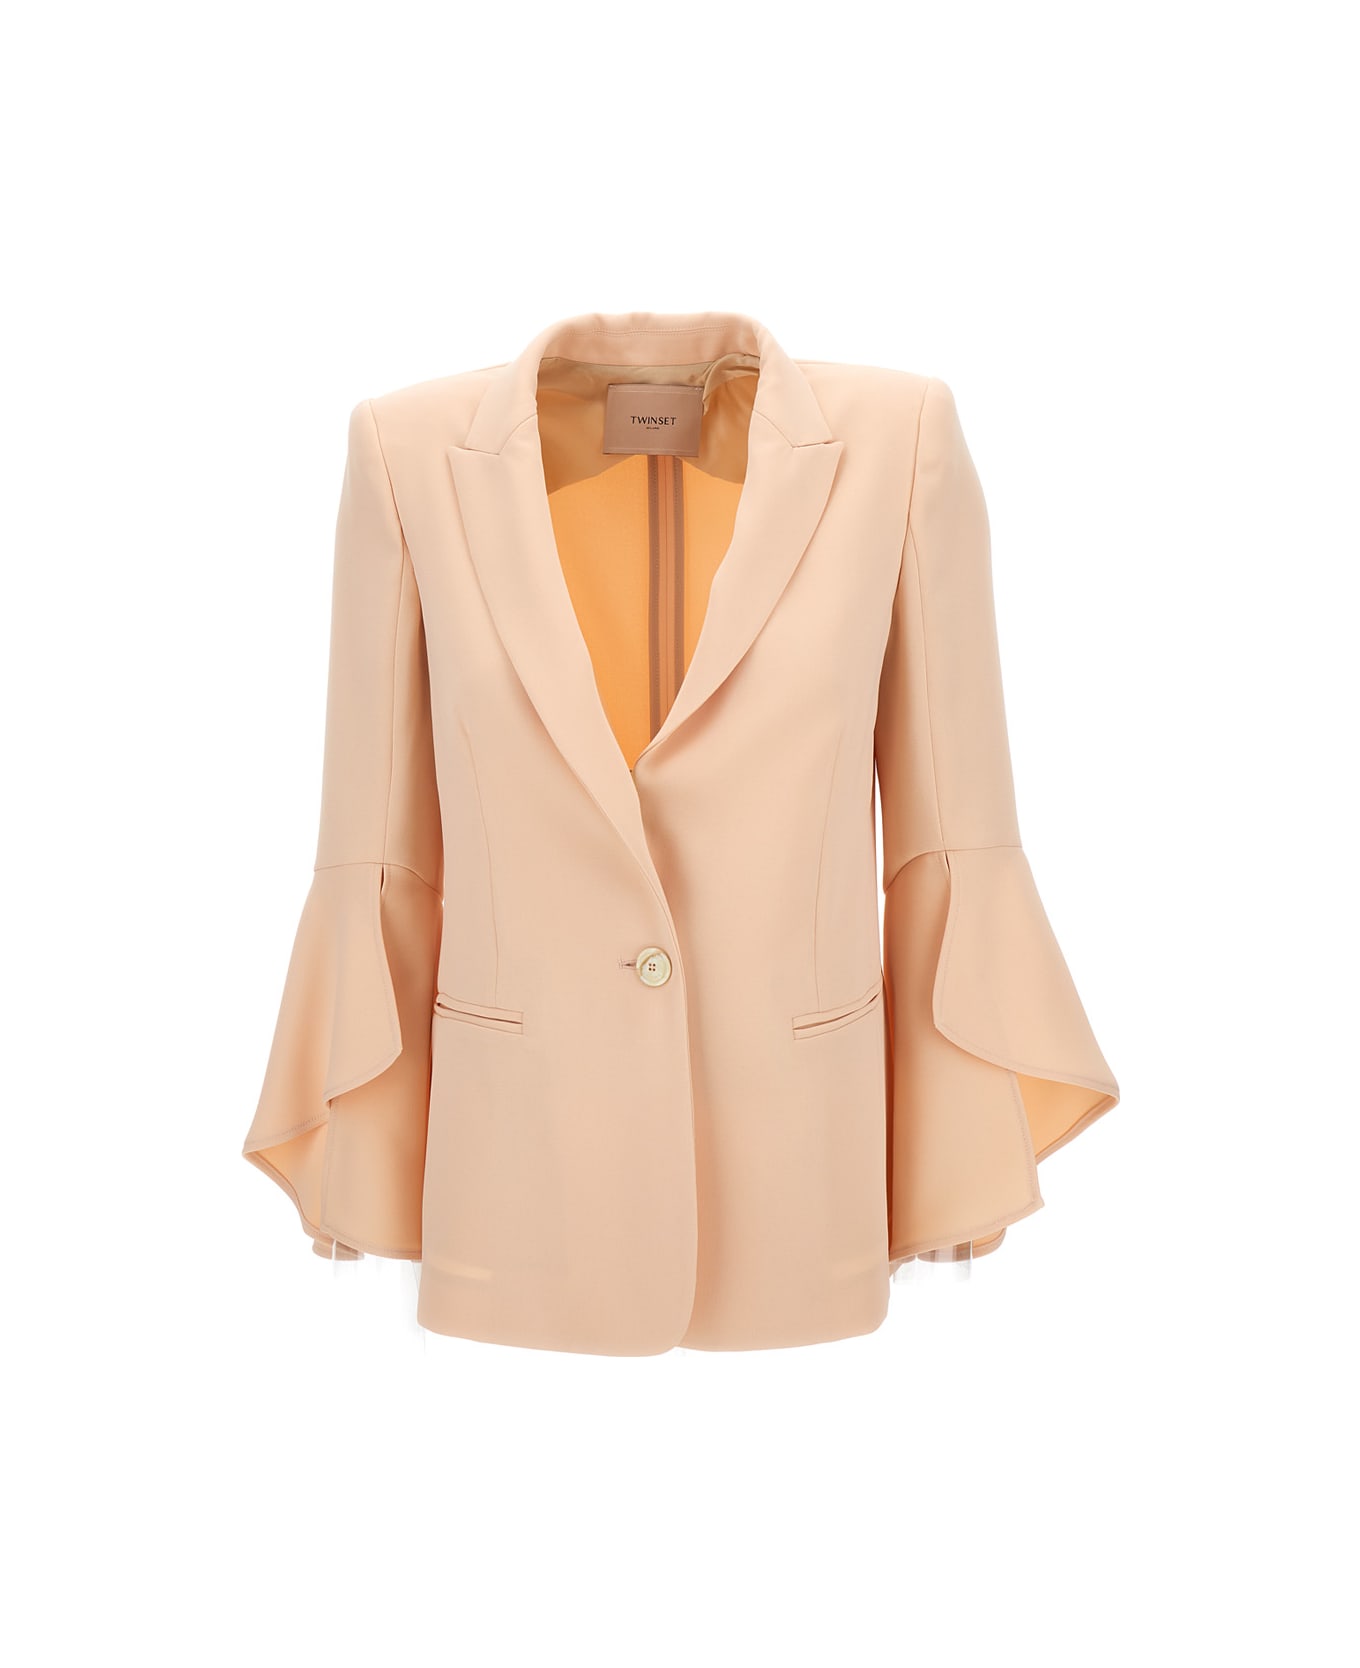 TwinSet Pink Blazer With Wide Sleeves In Technical Fabric Woman - LIGHT PINK ブレザー